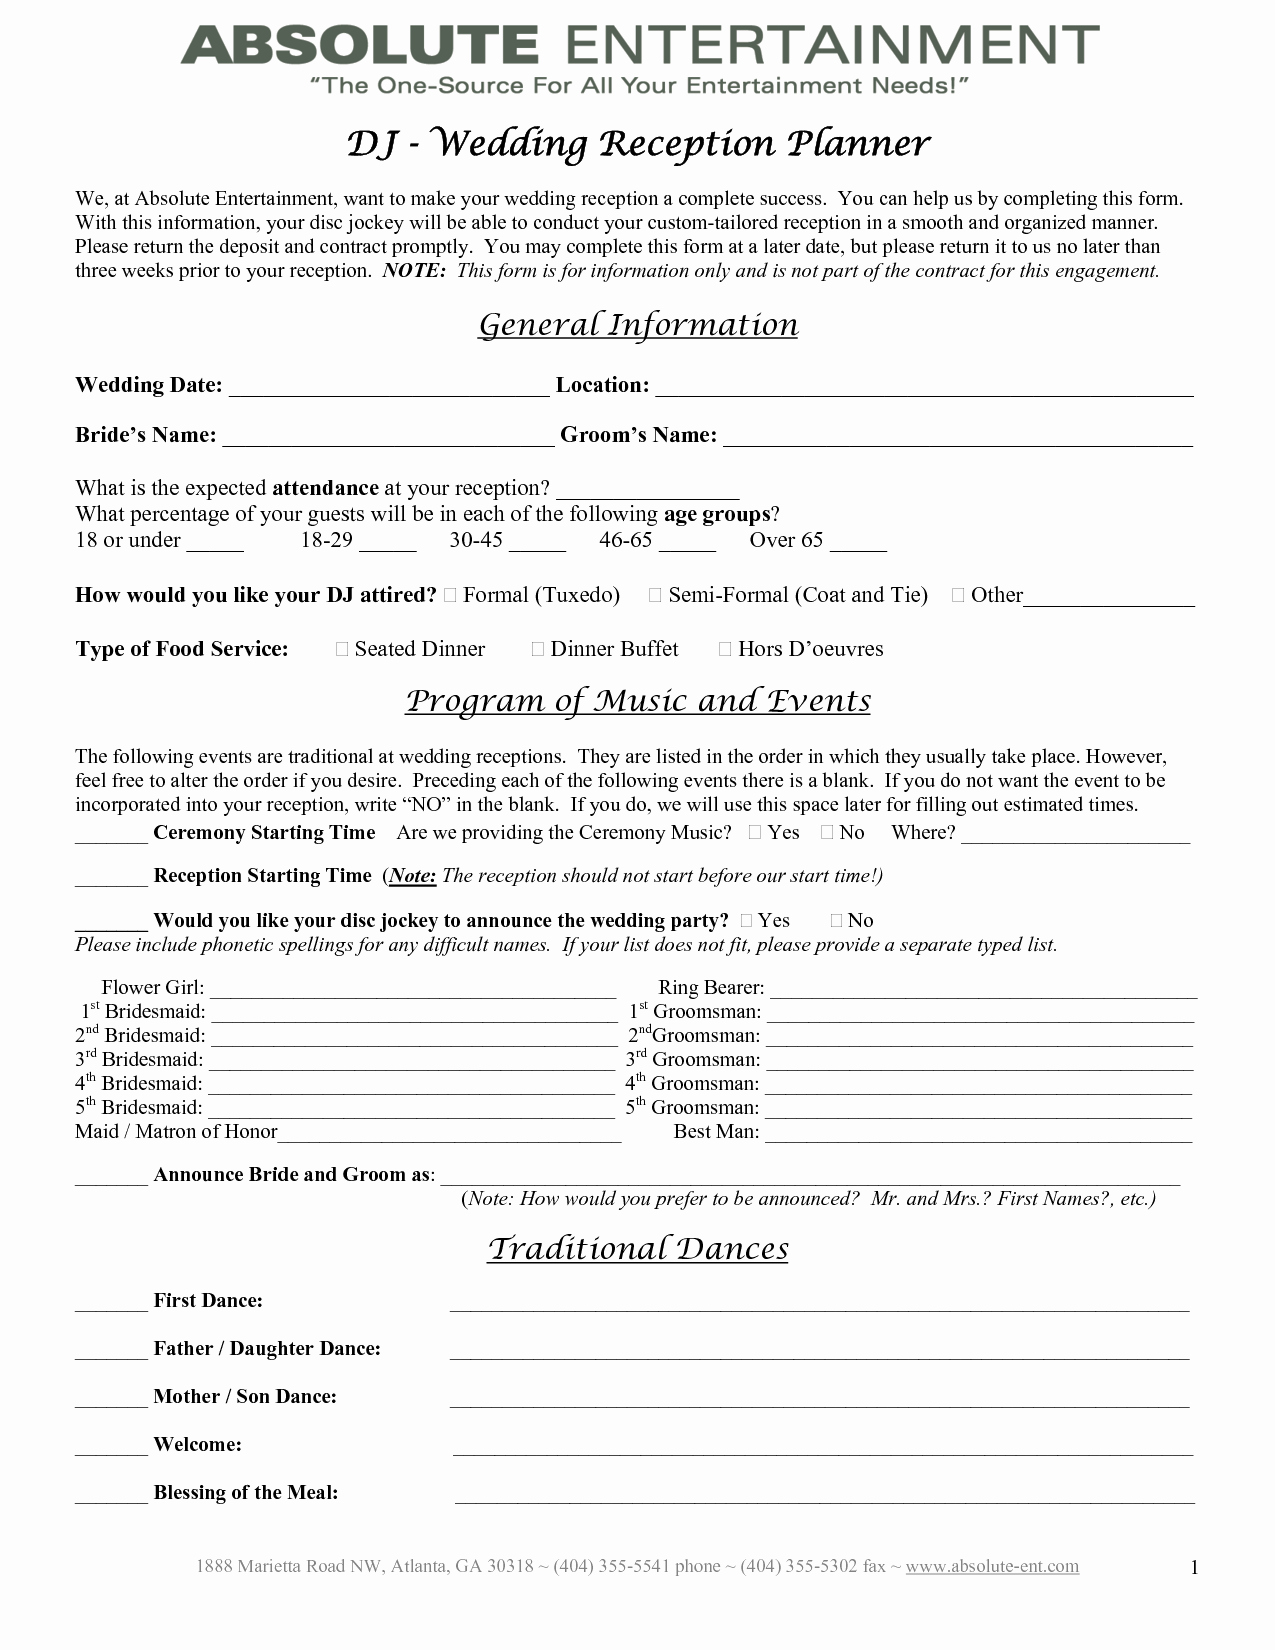 Wedding Planning Contract Templates Beautiful Wedding Planner Contract Template